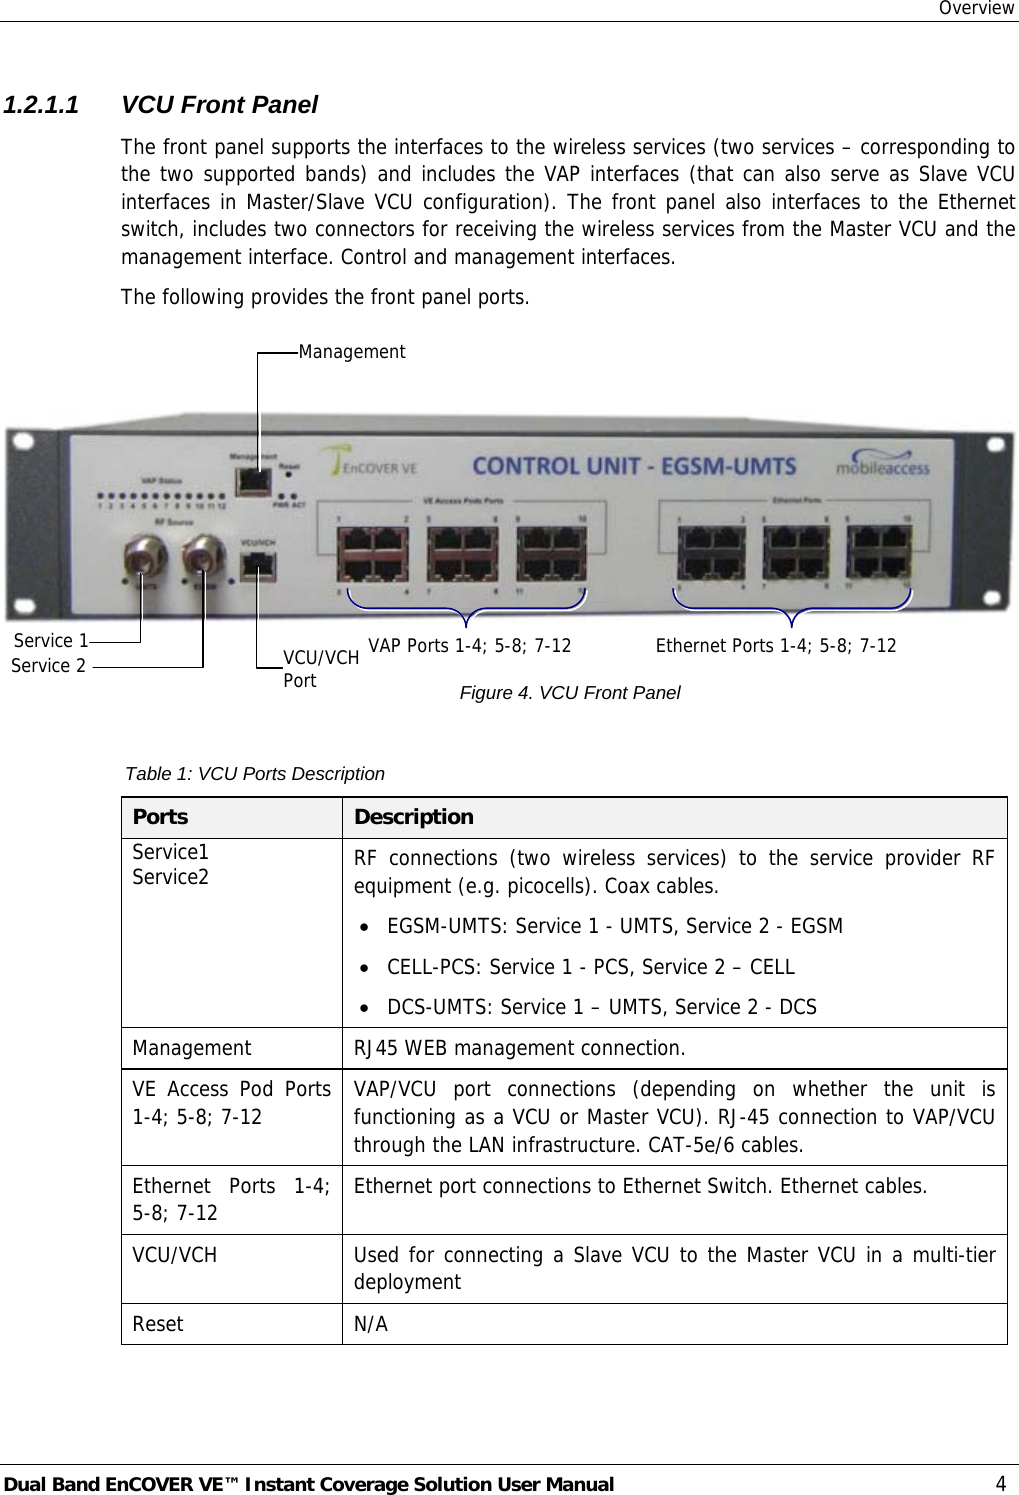 Overview Dual Band EnCOVER VE™ Instant Coverage Solution User Manual  4 1.2.1.1  VCU Front Panel The front panel supports the interfaces to the wireless services (two services – corresponding to the two supported bands) and includes the VAP interfaces (that can also serve as Slave VCU interfaces in Master/Slave VCU configuration). The front panel also interfaces to the Ethernet switch, includes two connectors for receiving the wireless services from the Master VCU and the management interface. Control and management interfaces.  The following provides the front panel ports.     Figure 4. VCU Front Panel  Table 1: VCU Ports Description Ports  Description Service1 Service2  RF connections (two wireless services) to the service provider RF equipment (e.g. picocells). Coax cables. • EGSM-UMTS: Service 1 - UMTS, Service 2 - EGSM • CELL-PCS: Service 1 - PCS, Service 2 – CELL • DCS-UMTS: Service 1 – UMTS, Service 2 - DCS Management  RJ45 WEB management connection. VE Access Pod Ports 1-4; 5-8; 7-12   VAP/VCU port connections (depending on whether the unit is functioning as a VCU or Master VCU). RJ-45 connection to VAP/VCU through the LAN infrastructure. CAT-5e/6 cables. Ethernet Ports 1-4; 5-8; 7-12   Ethernet port connections to Ethernet Switch. Ethernet cables. VCU/VCH  Used for connecting a Slave VCU to the Master VCU in a multi-tier deployment Reset   N/A  Ethernet Ports 1-4; 5-8; 7-12VAP Ports 1-4; 5-8; 7-12 ManagementService 2 Service 1VCU/VCH Port 